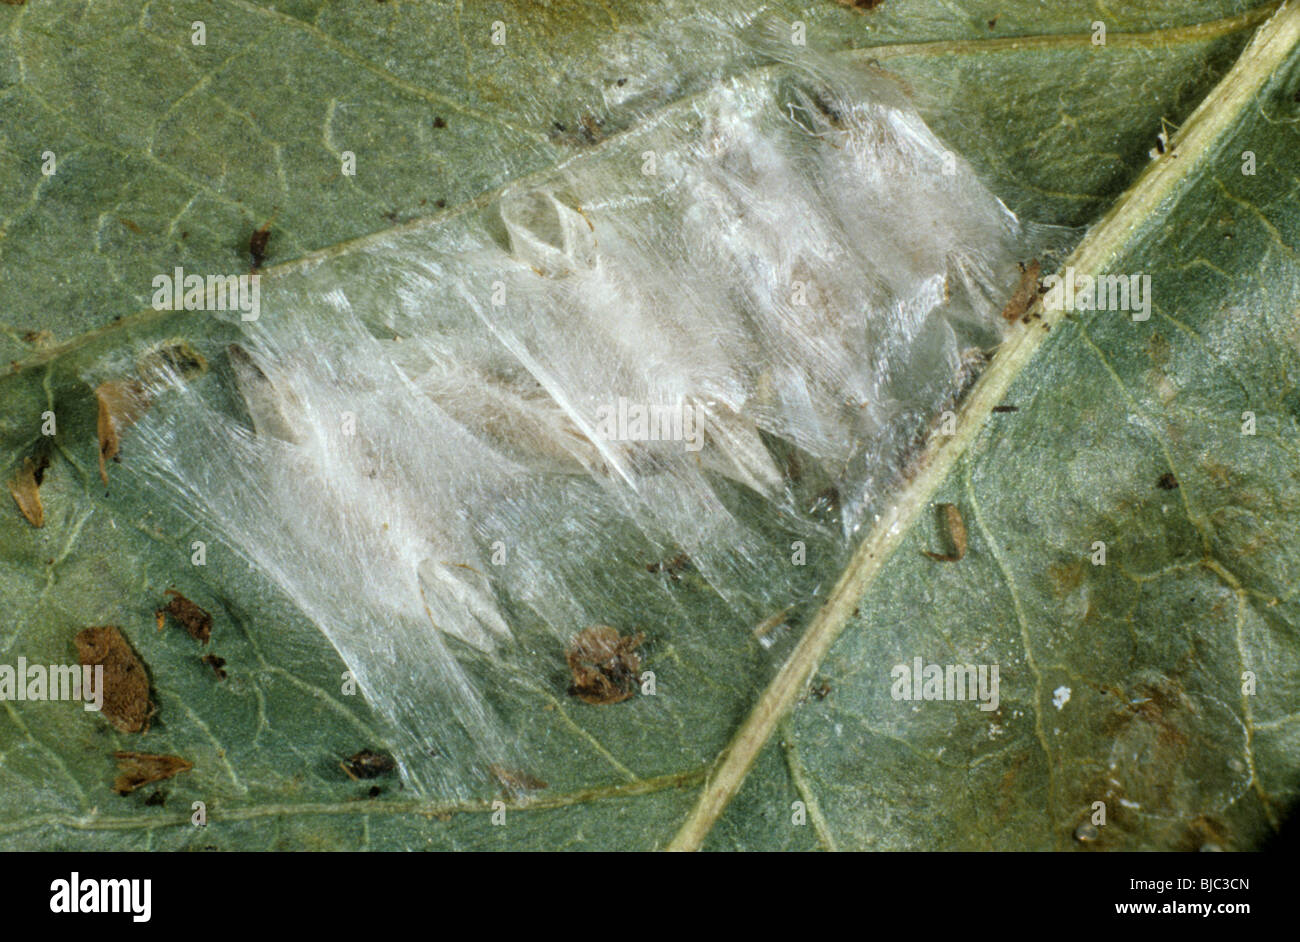 Cocoons of apple leafminer (Leucoptera malifoliella) attached to an apple leaf Stock Photo